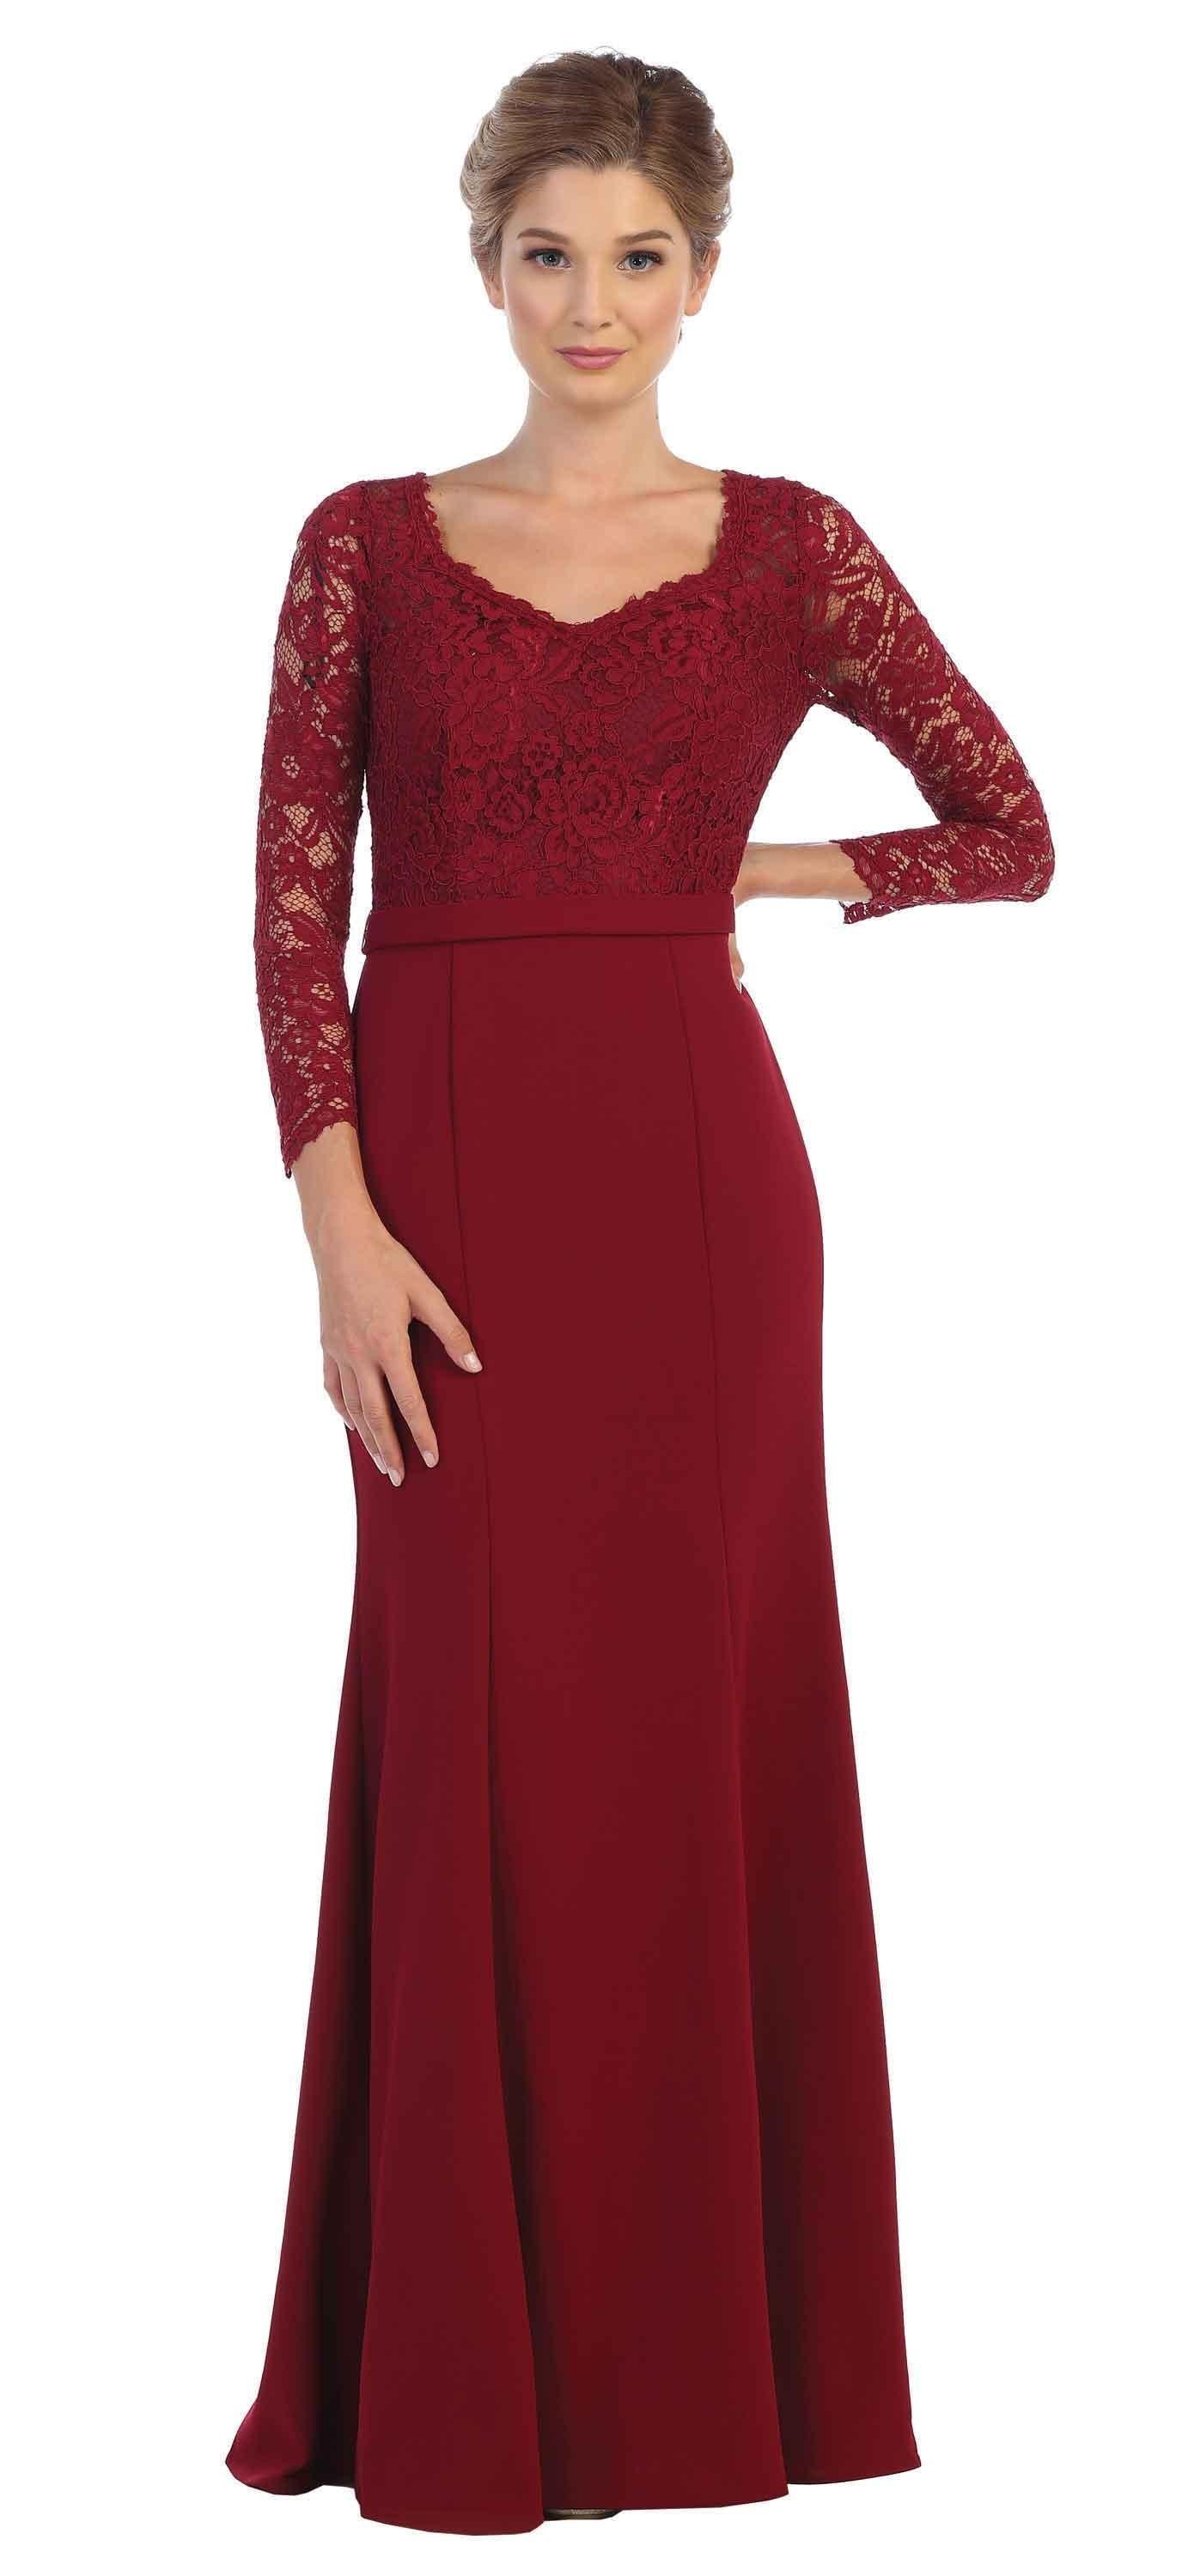 Long Sleeve Mother of the Bride Formal Dress Sale - The Dress Outlet